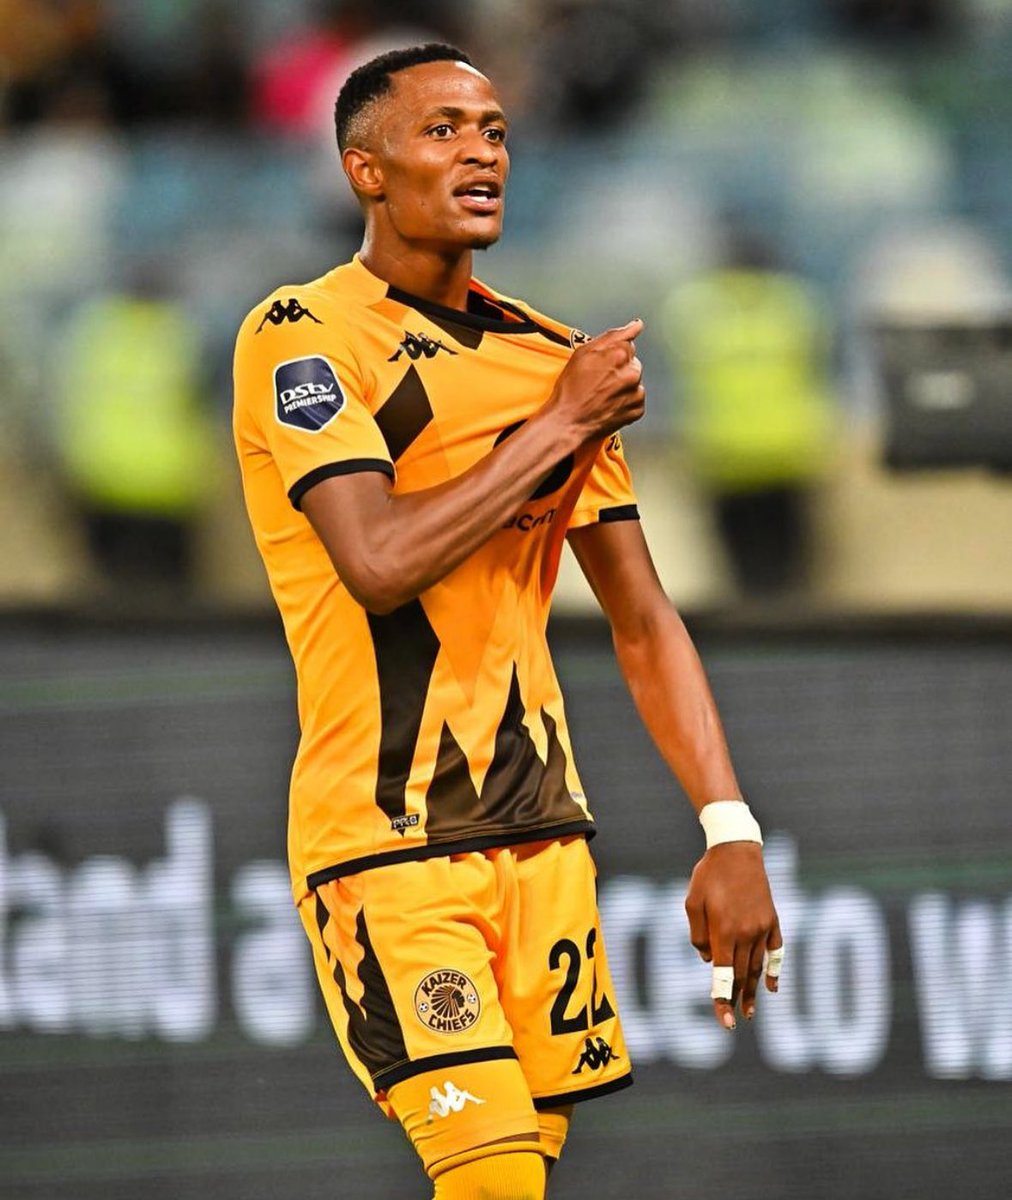 @RealTshemedi This is not what we followed you for, stop embrassing  us. Pirate will never be good to us. Shandre Campbell is clear ✌️💛